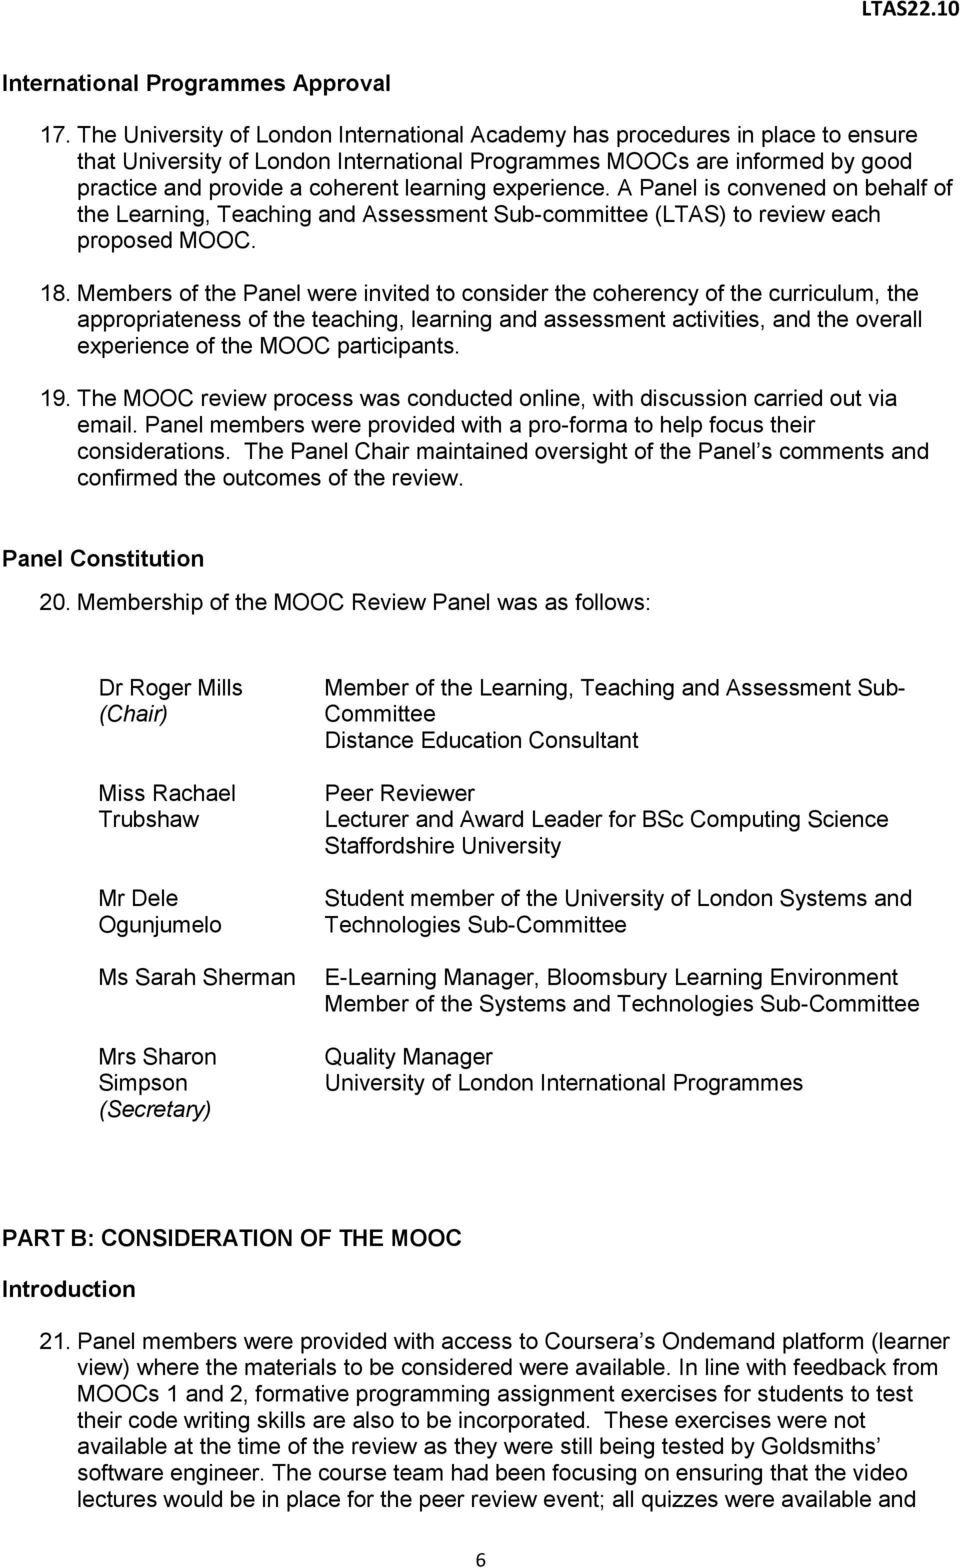 experience. A Panel is convened on behalf of the Learning, Teaching and Assessment Sub-committee (LTAS) to review each proposed MOOC. 18.